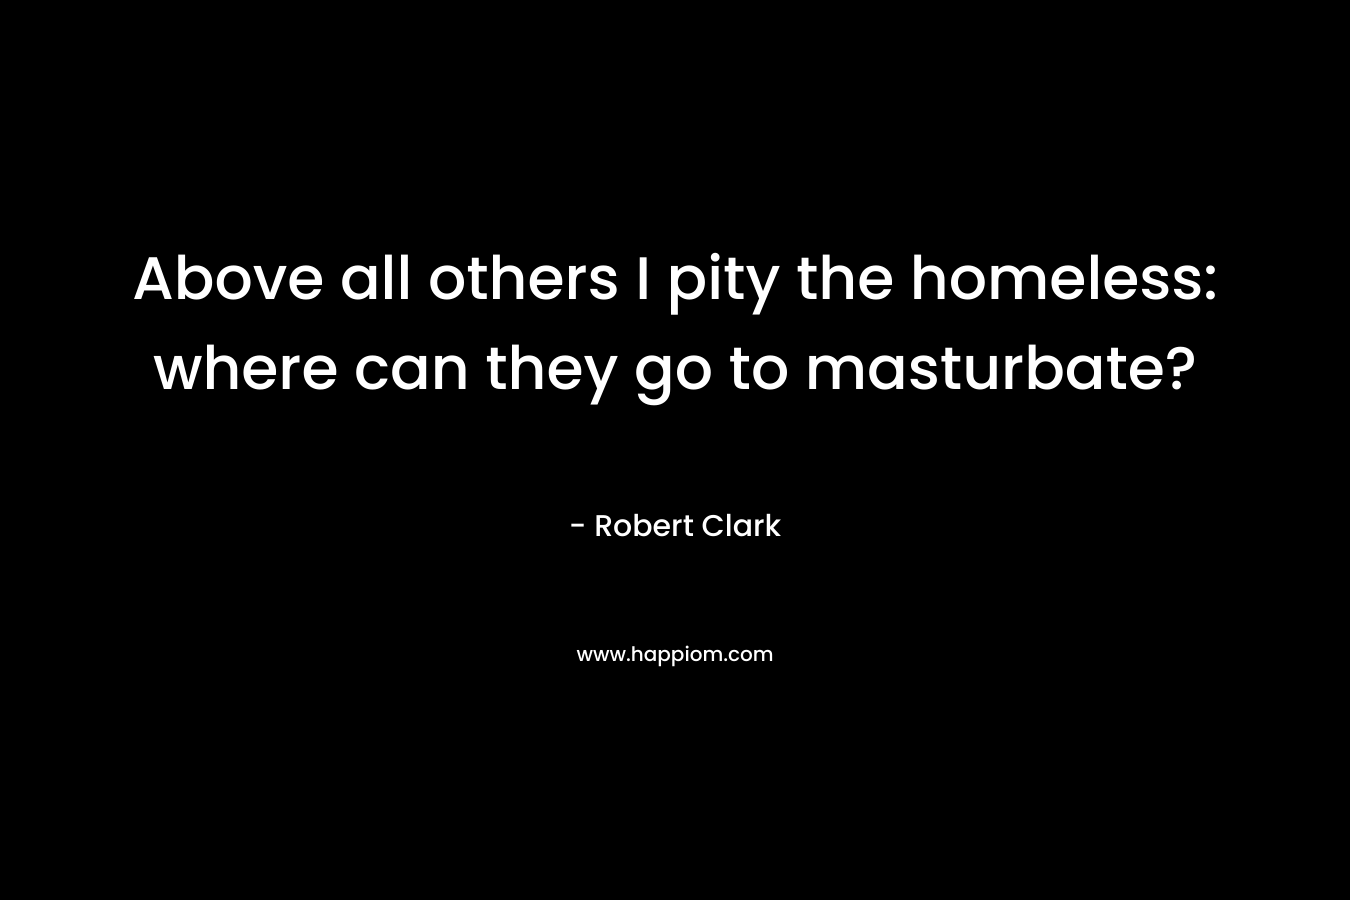 Above all others I pity the homeless: where can they go to masturbate? – Robert Clark